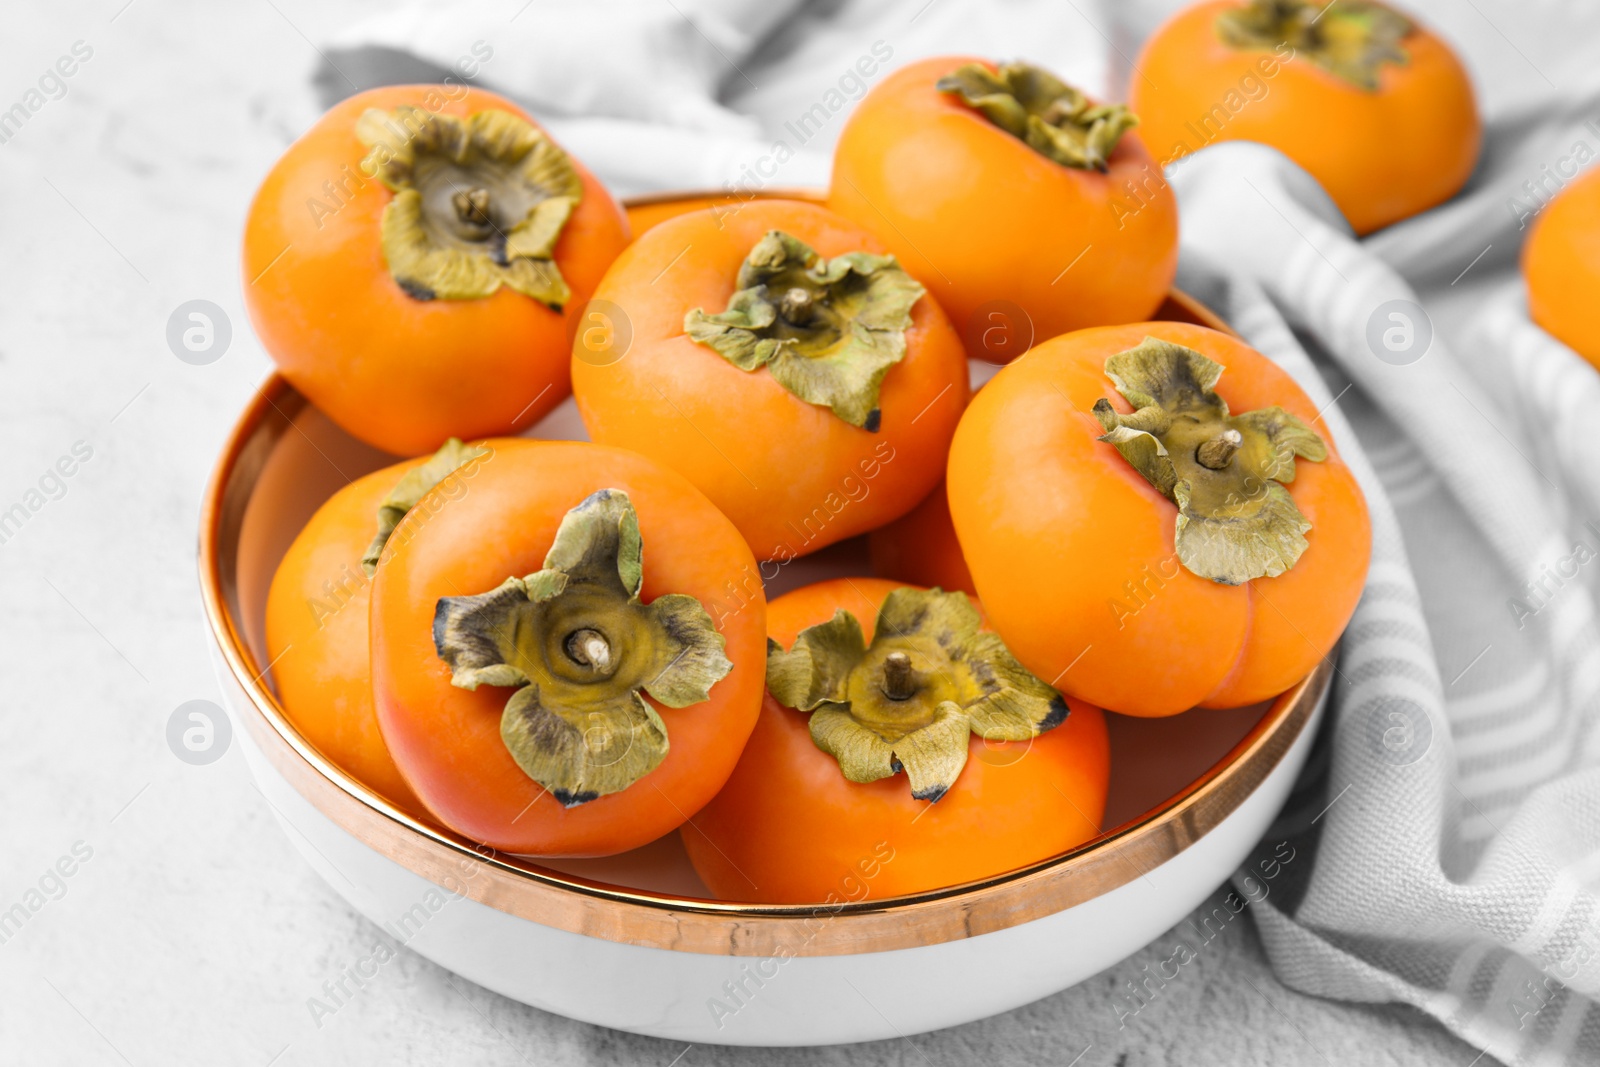 Photo of Bowl with delicious ripe juicy persimmons on white textured table